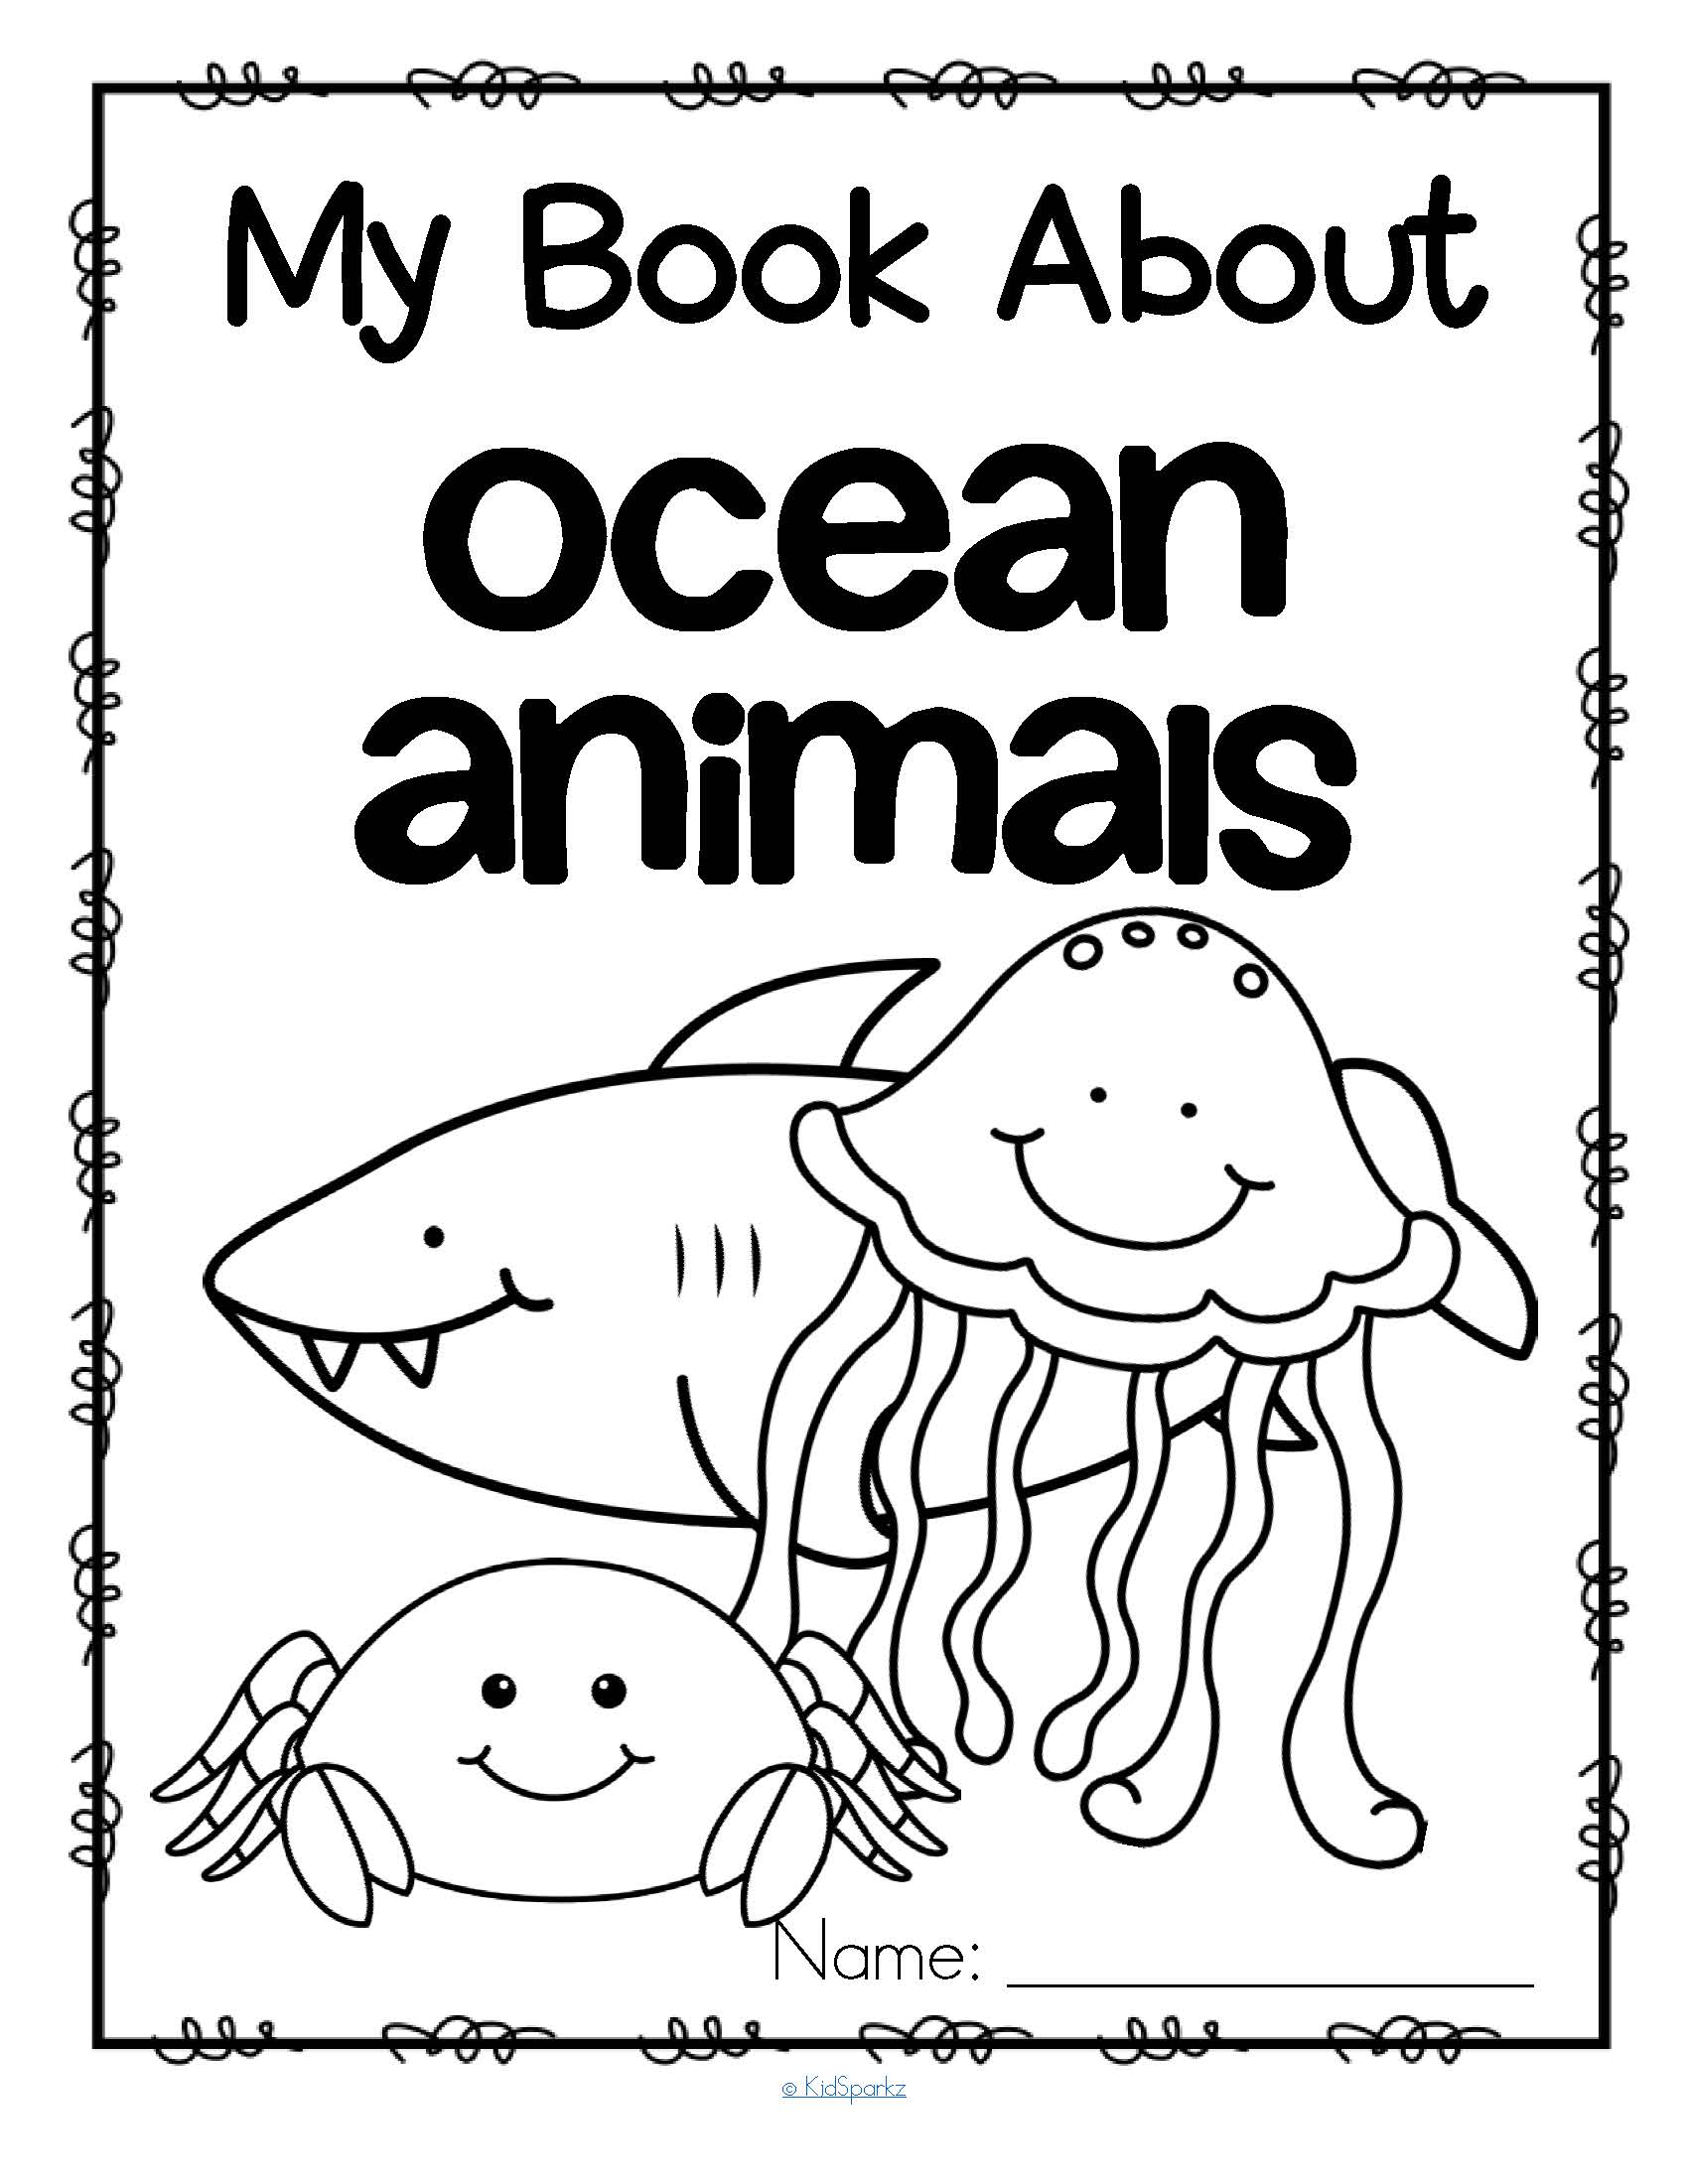 my-book-about-ocean-animals